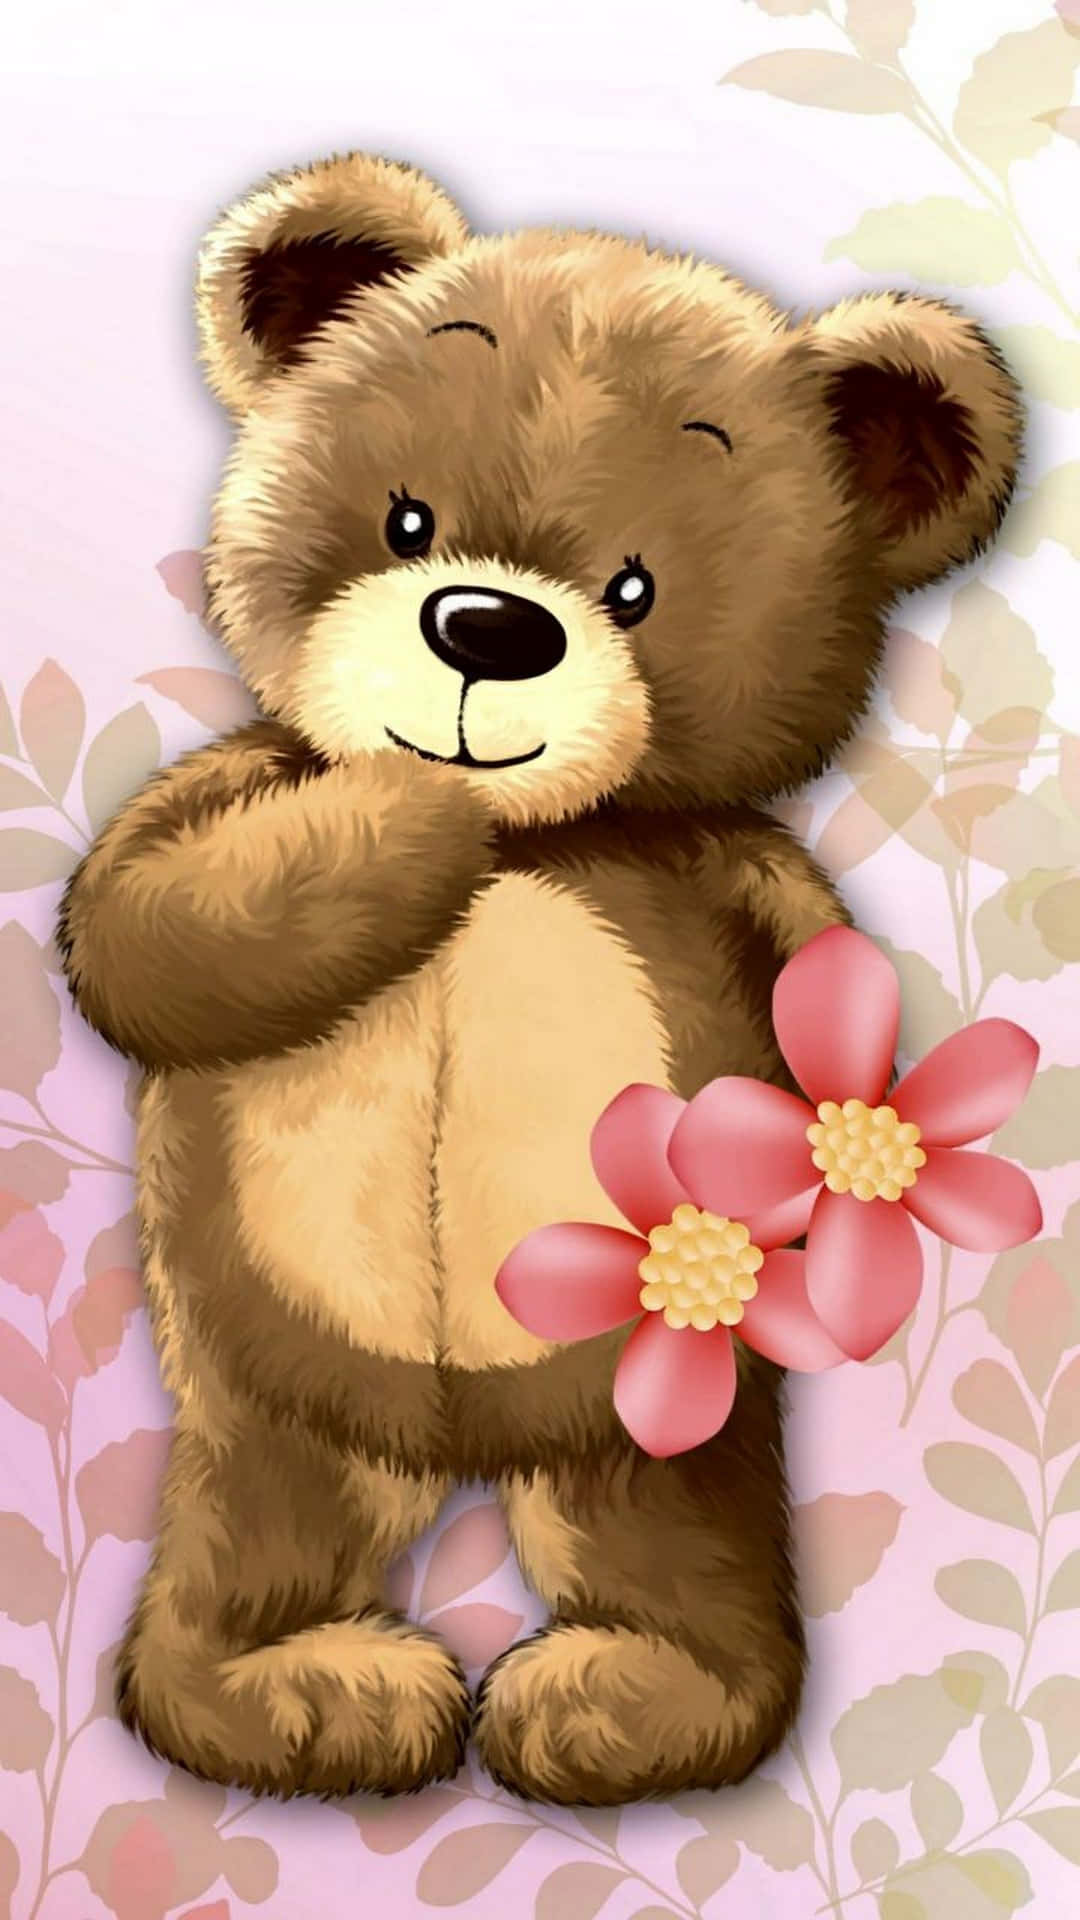 Adorable Teddy Bear With A Dreamy Background